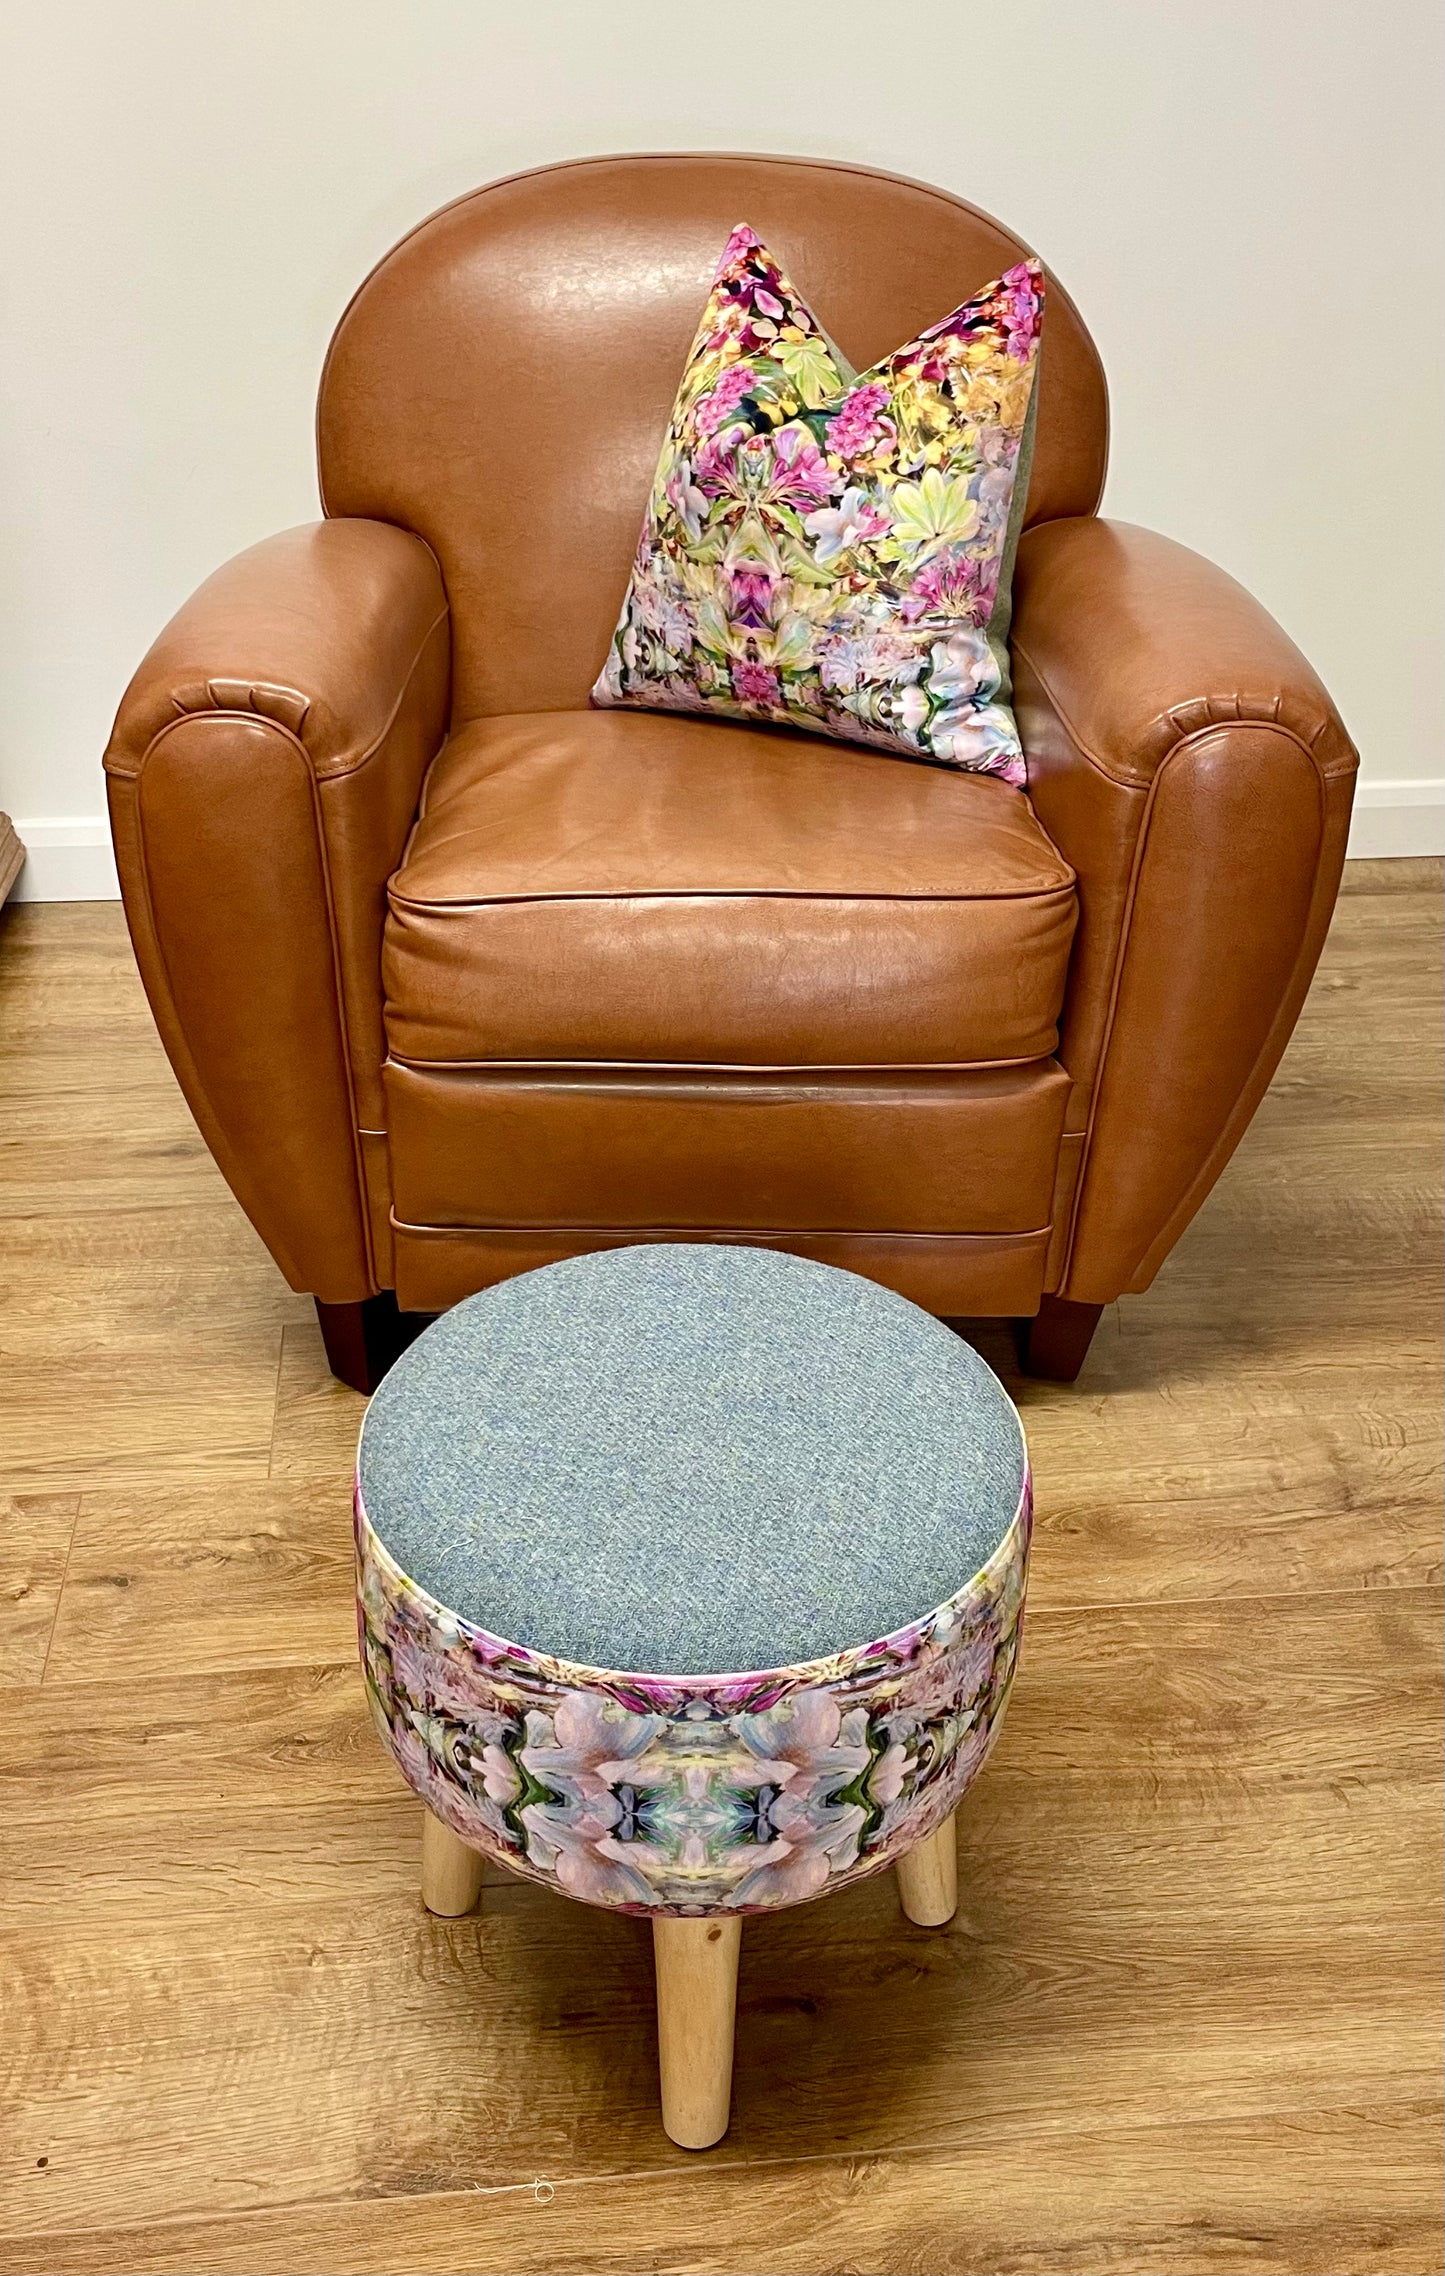 Floral Velvet and Light Blue Harris Tweed Upholstered Footstool with Light Rustic Wooden Legs.